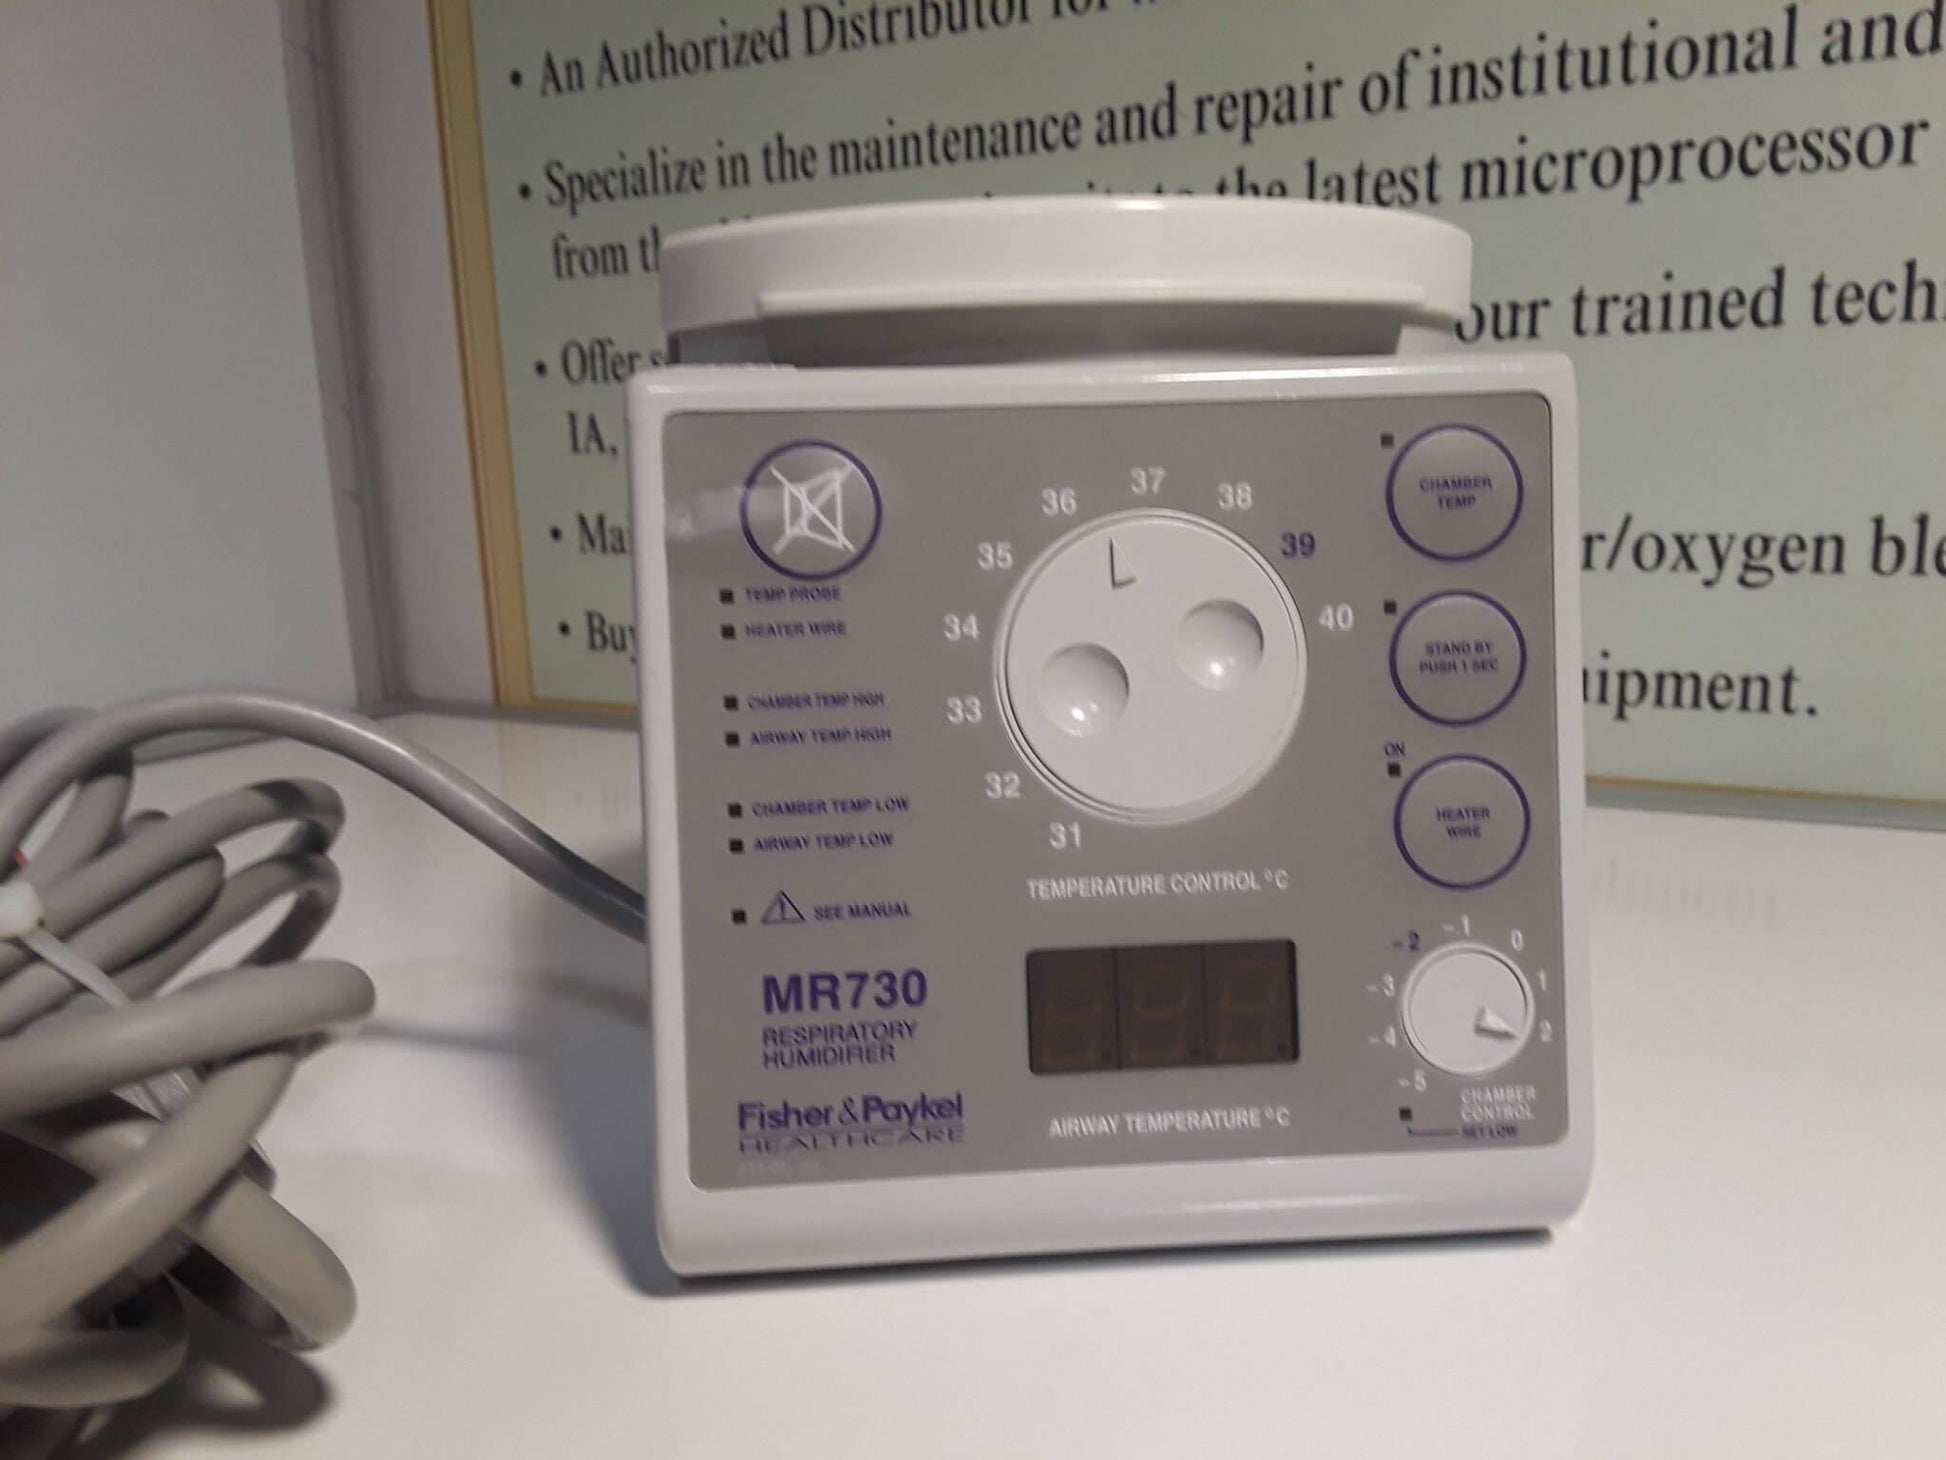 USED Fisher & Paykel Healthcare MR730 Humidifier With Temp Probe - MBR Medicals